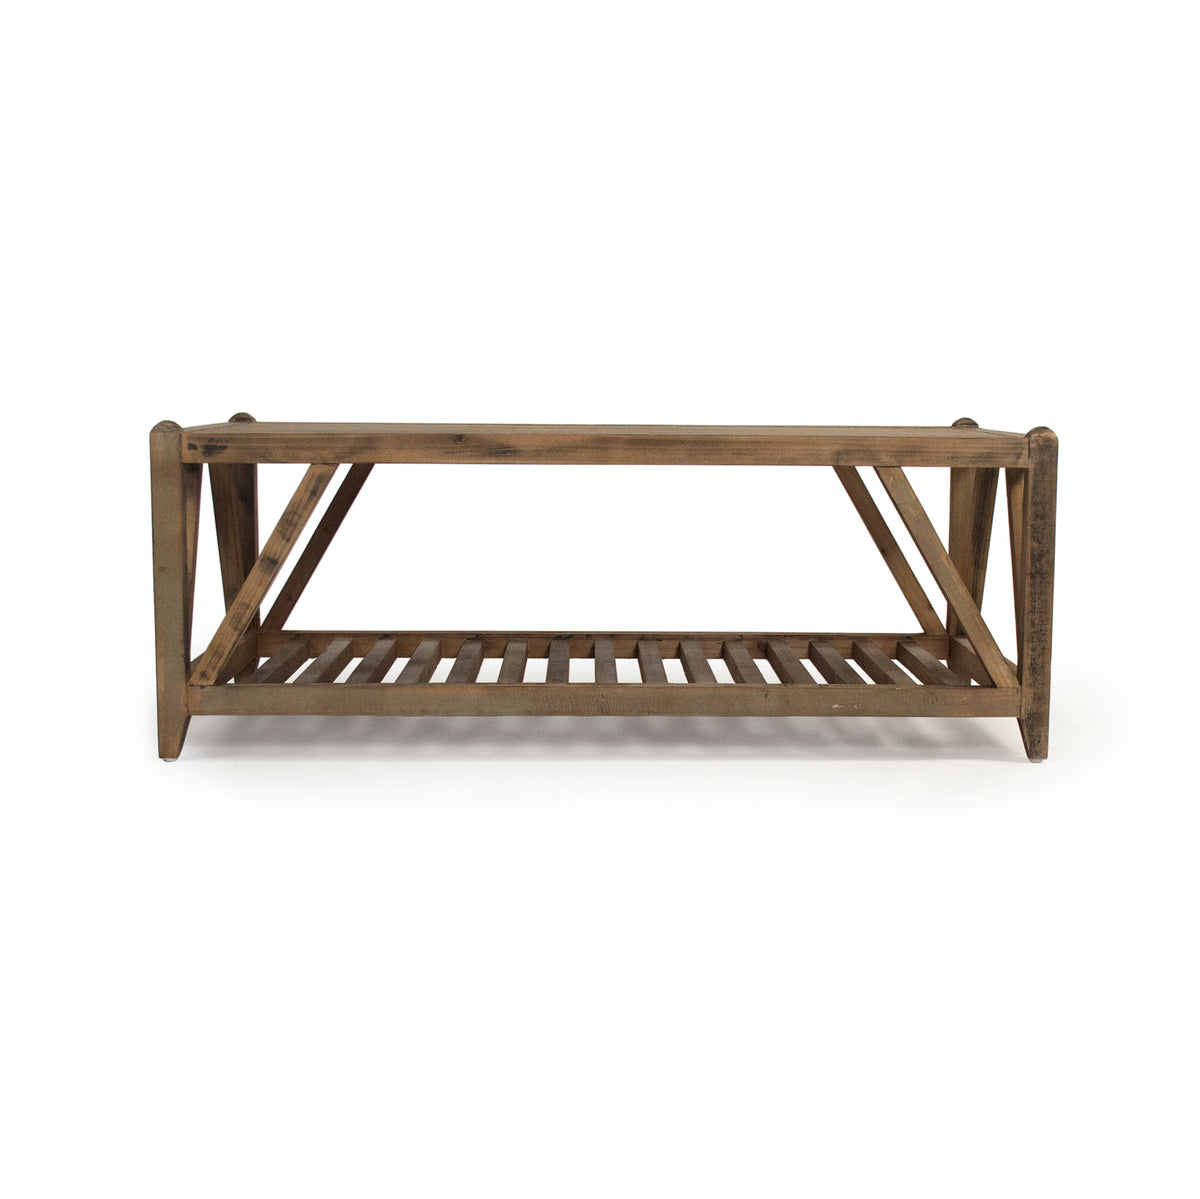 Mathis Coffee Table by Zentique